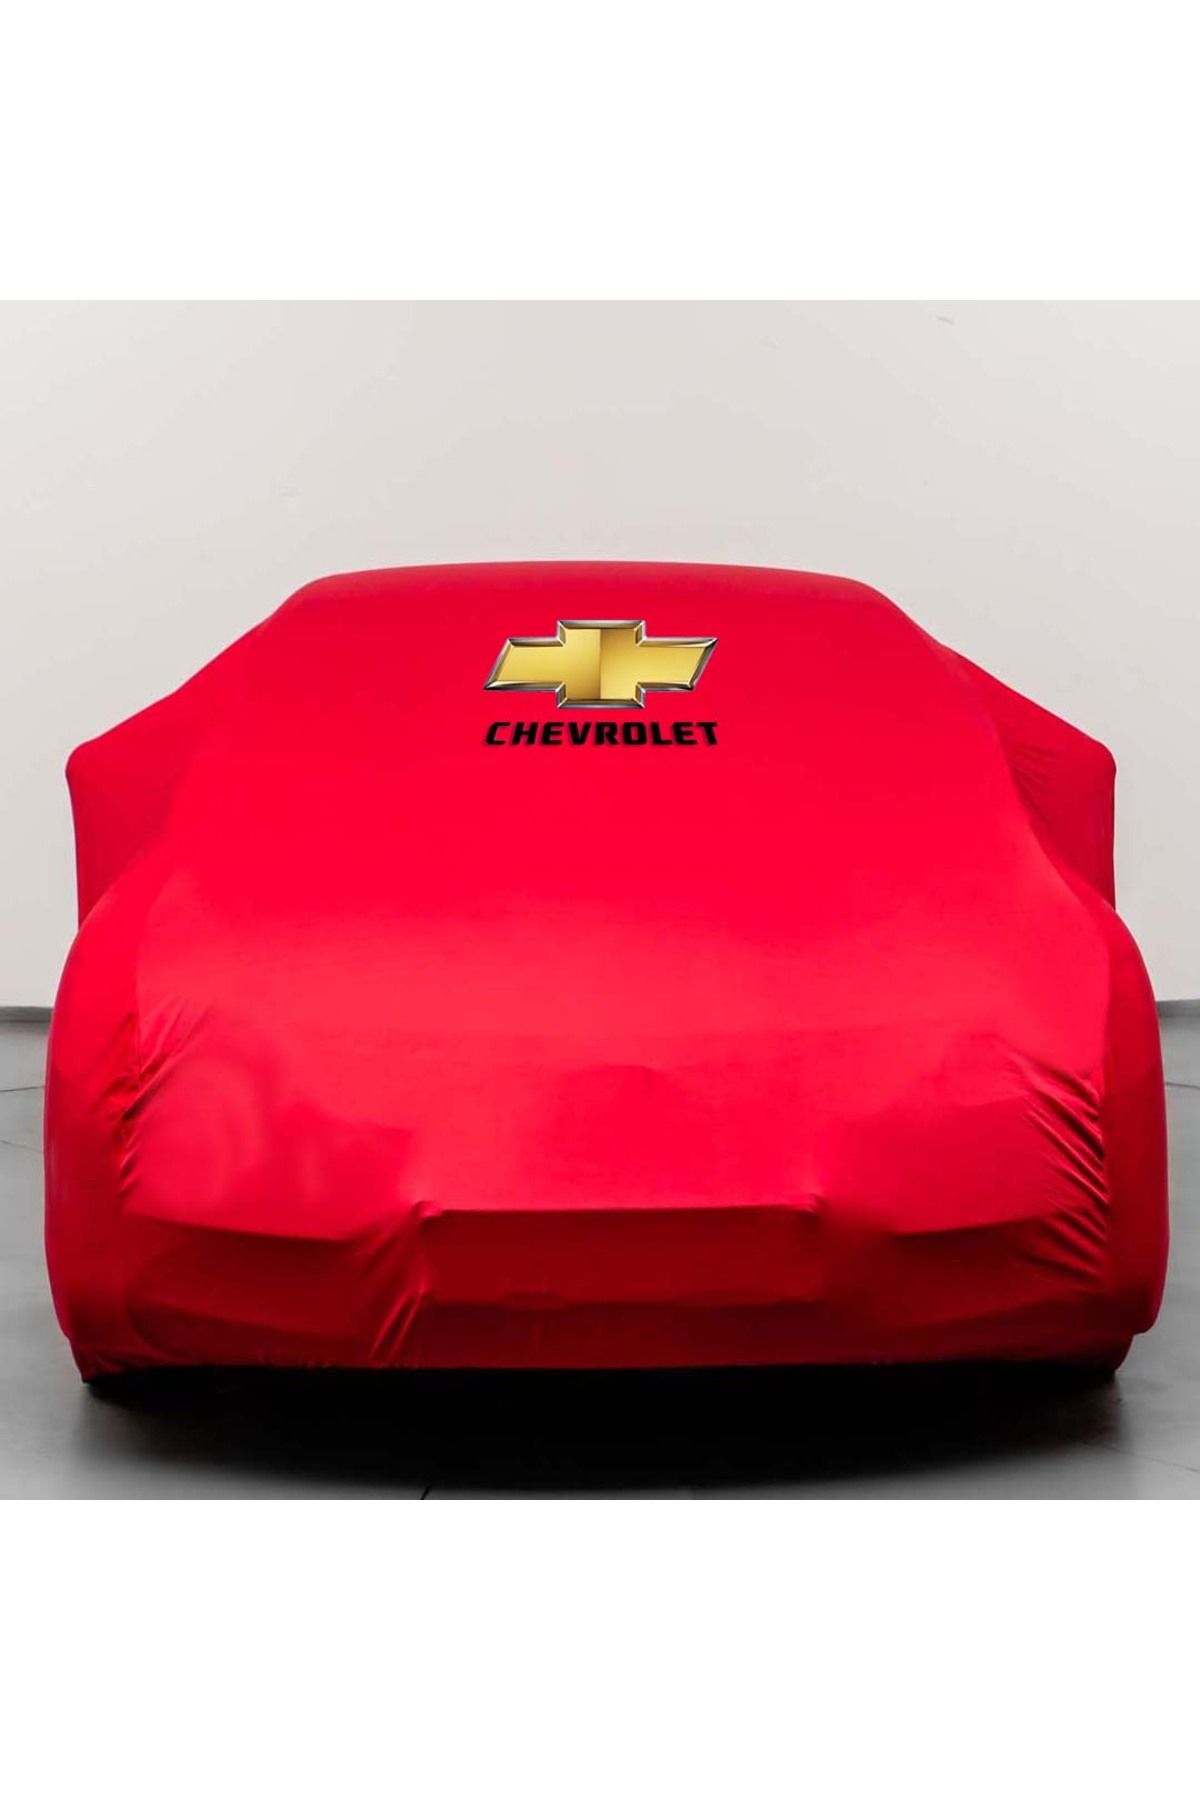 Teksin CHEVROLET SPARK EV-IV (2013-) Auto Tarpaulin with Fabric Logo -  Combed Cotton Cover RED - Trendyol